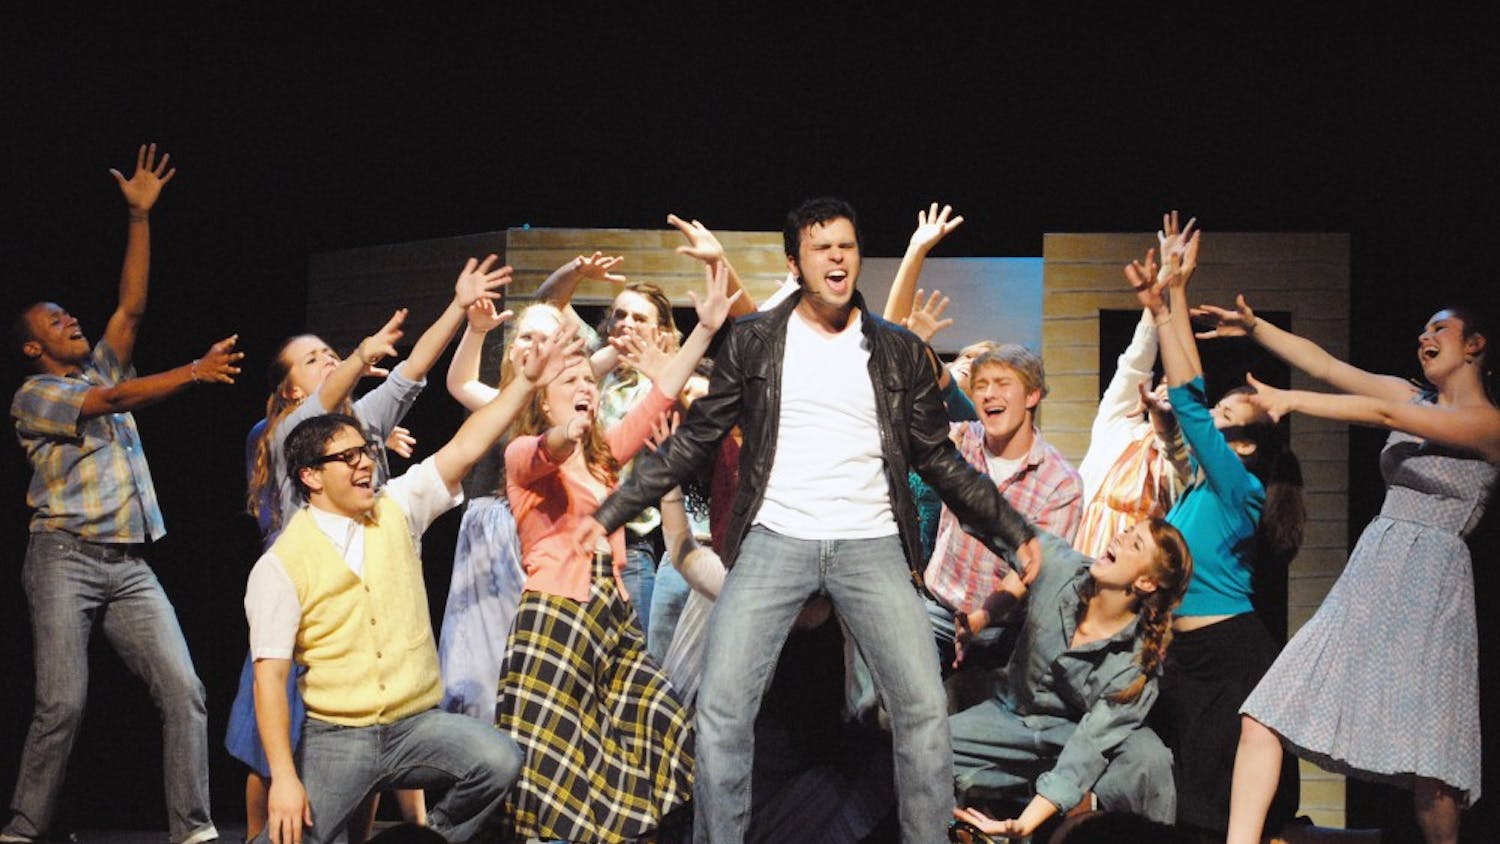 Photo: Pauper Players to rock with Elvis (Mary Koenig)